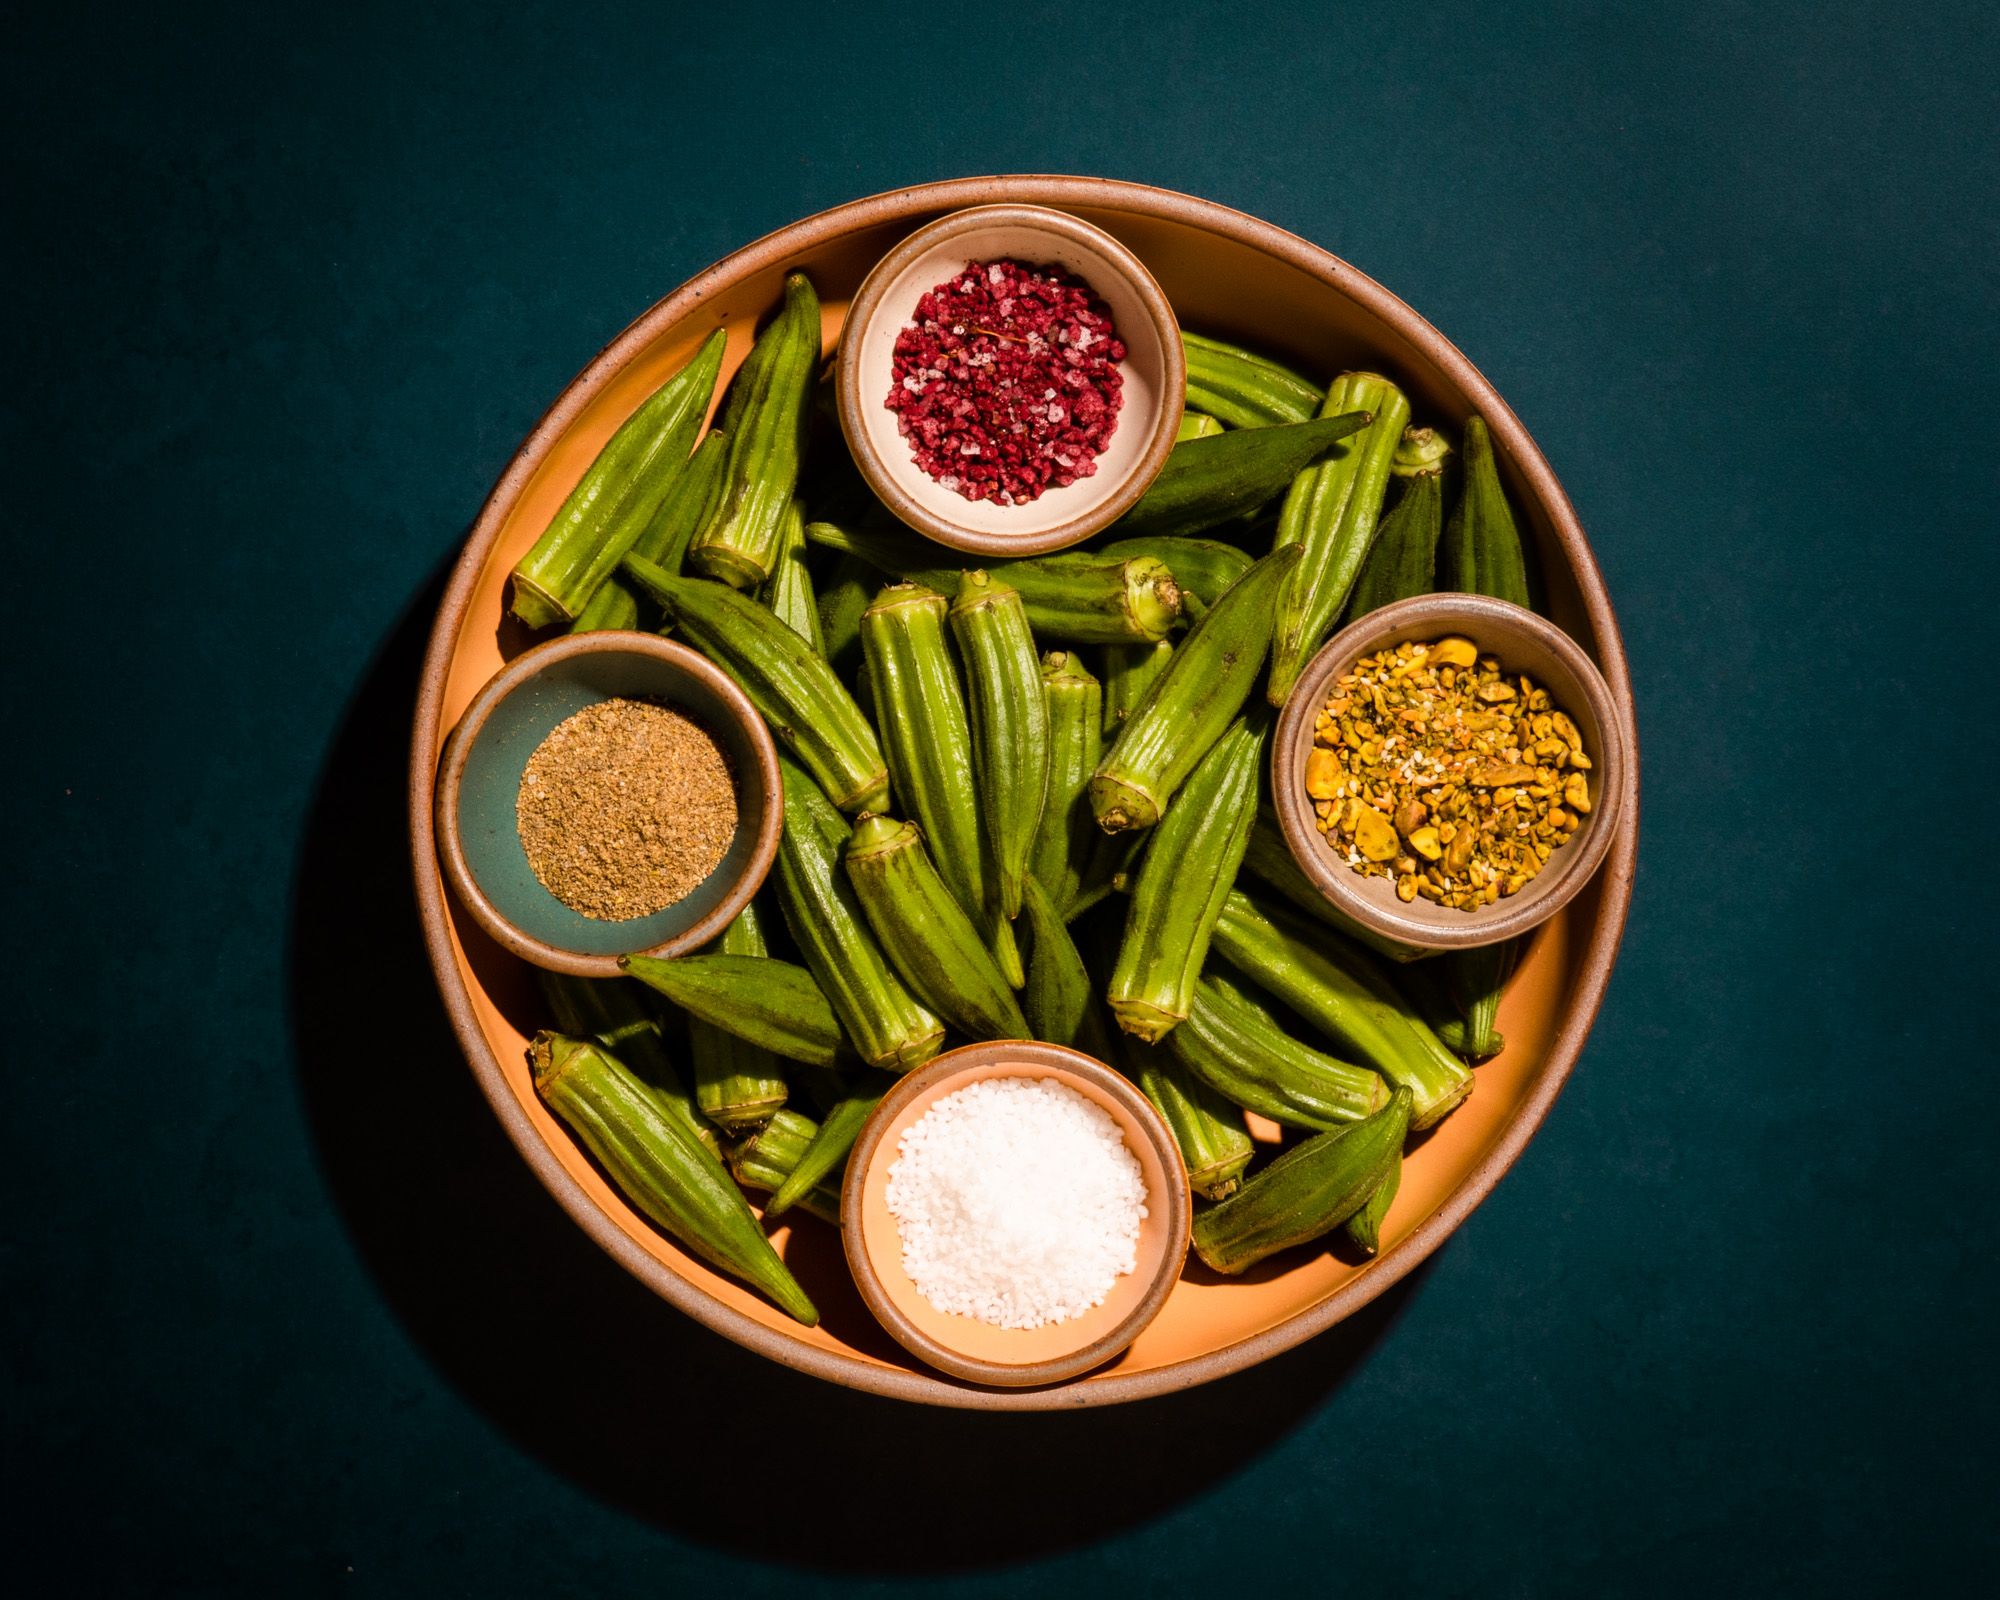 A large shallow serving bowl filled whole okra and 4 small colorful bowls with various colorful seasonings.